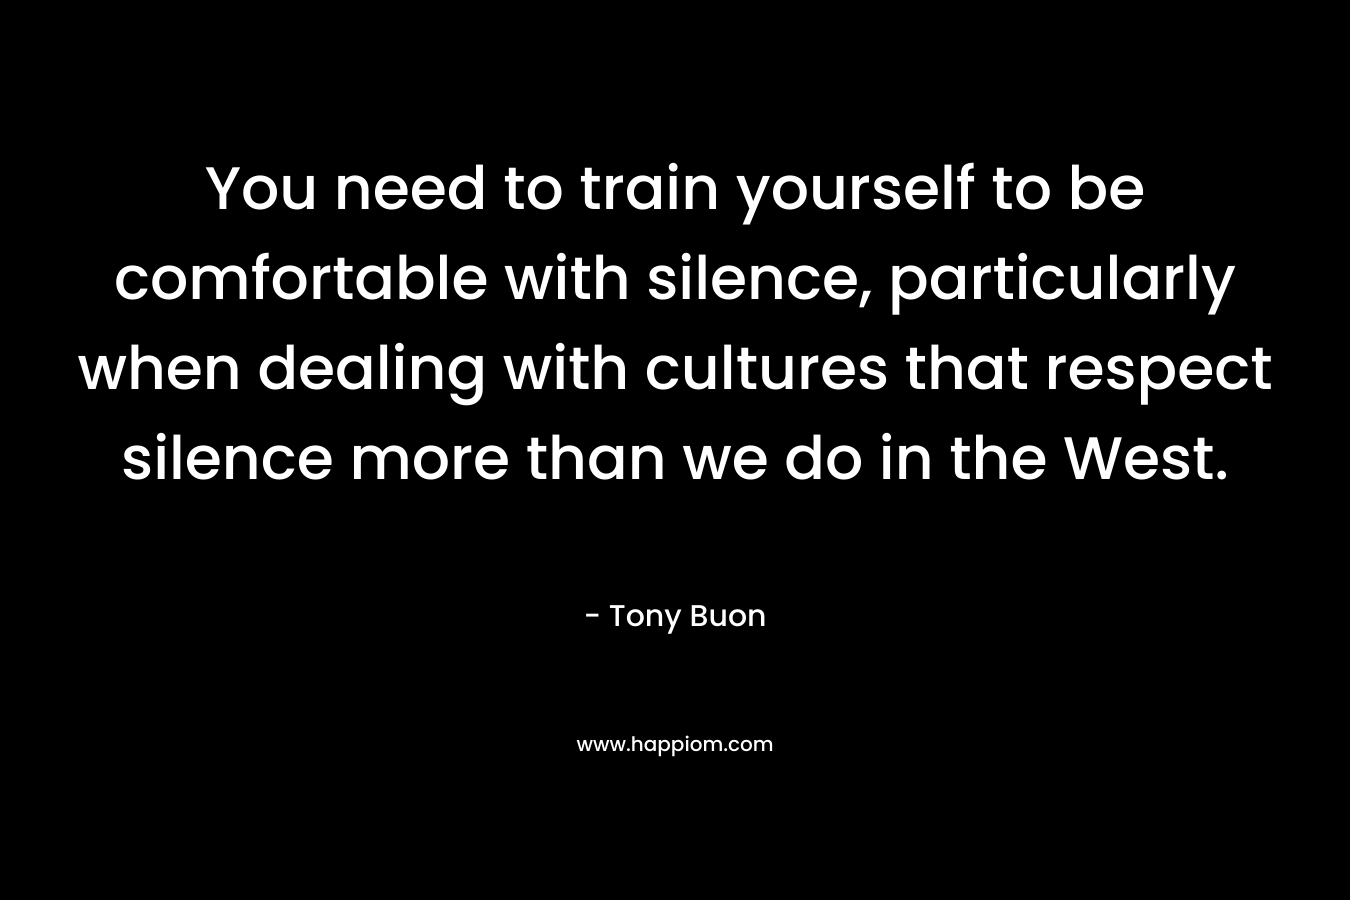 You need to train yourself to be comfortable with silence, particularly when dealing with cultures that respect silence more than we do in the West. – Tony Buon